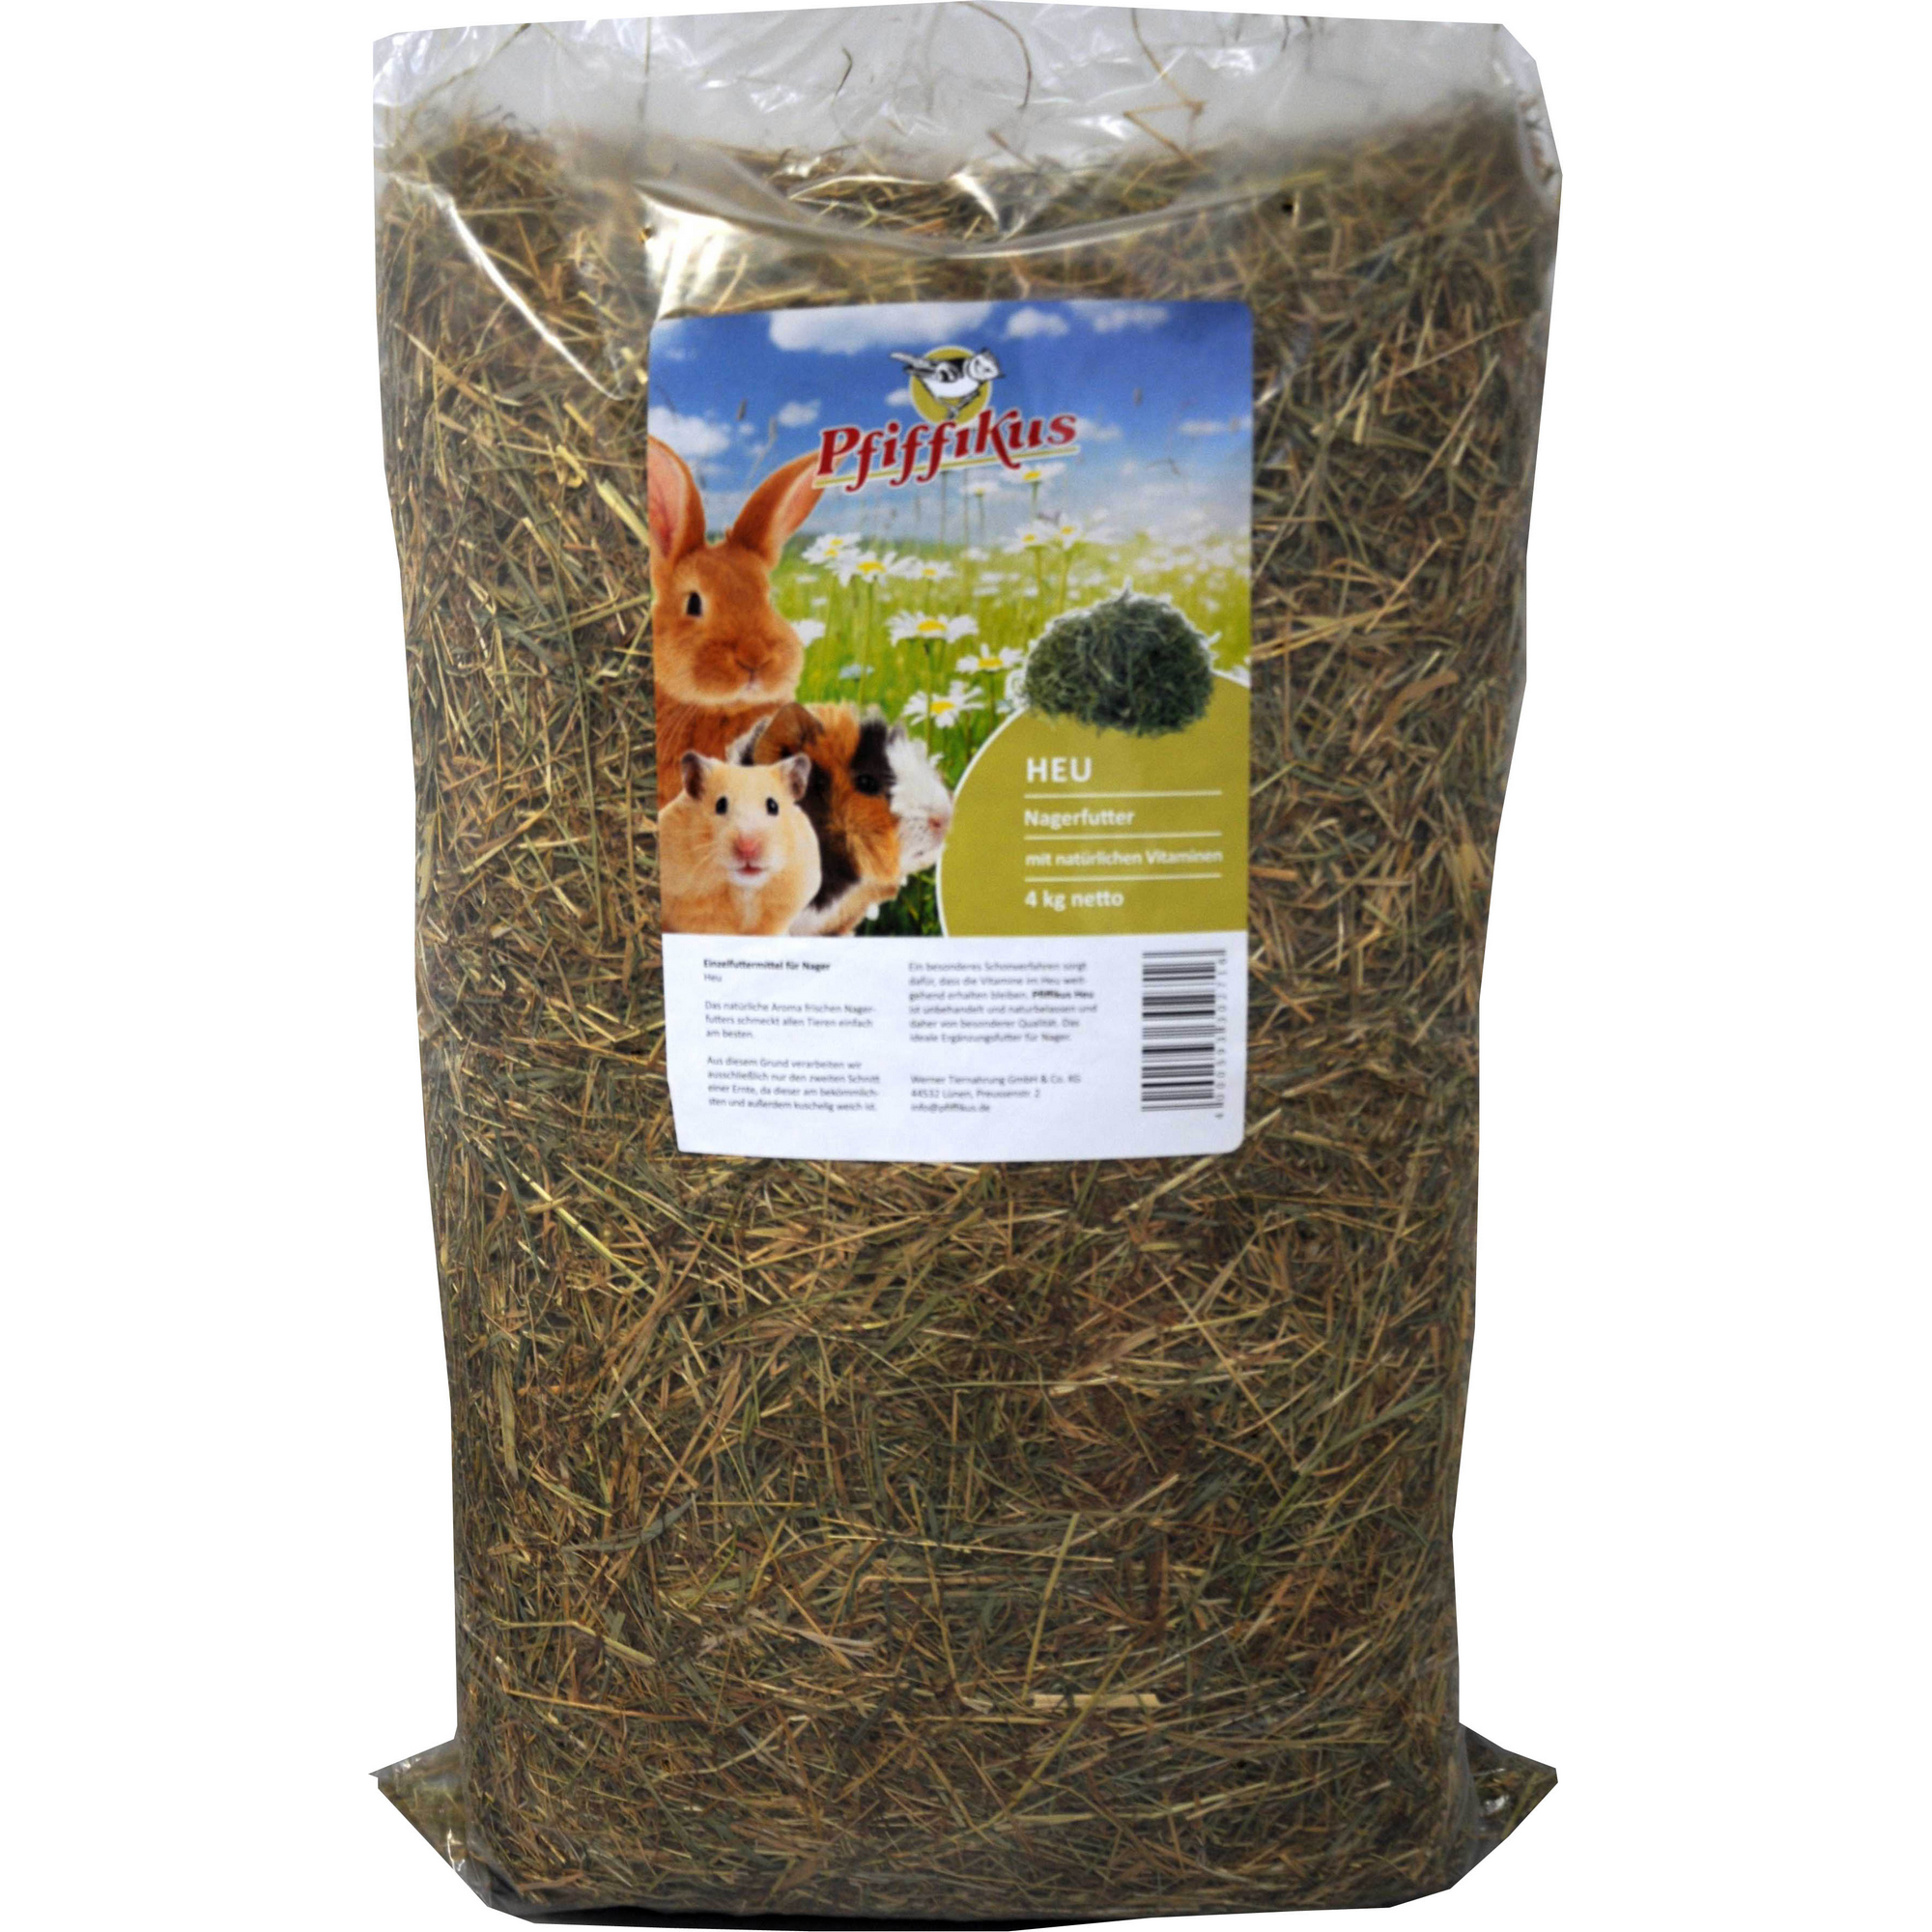 Nagerfutter Heu, 4 kg + product picture